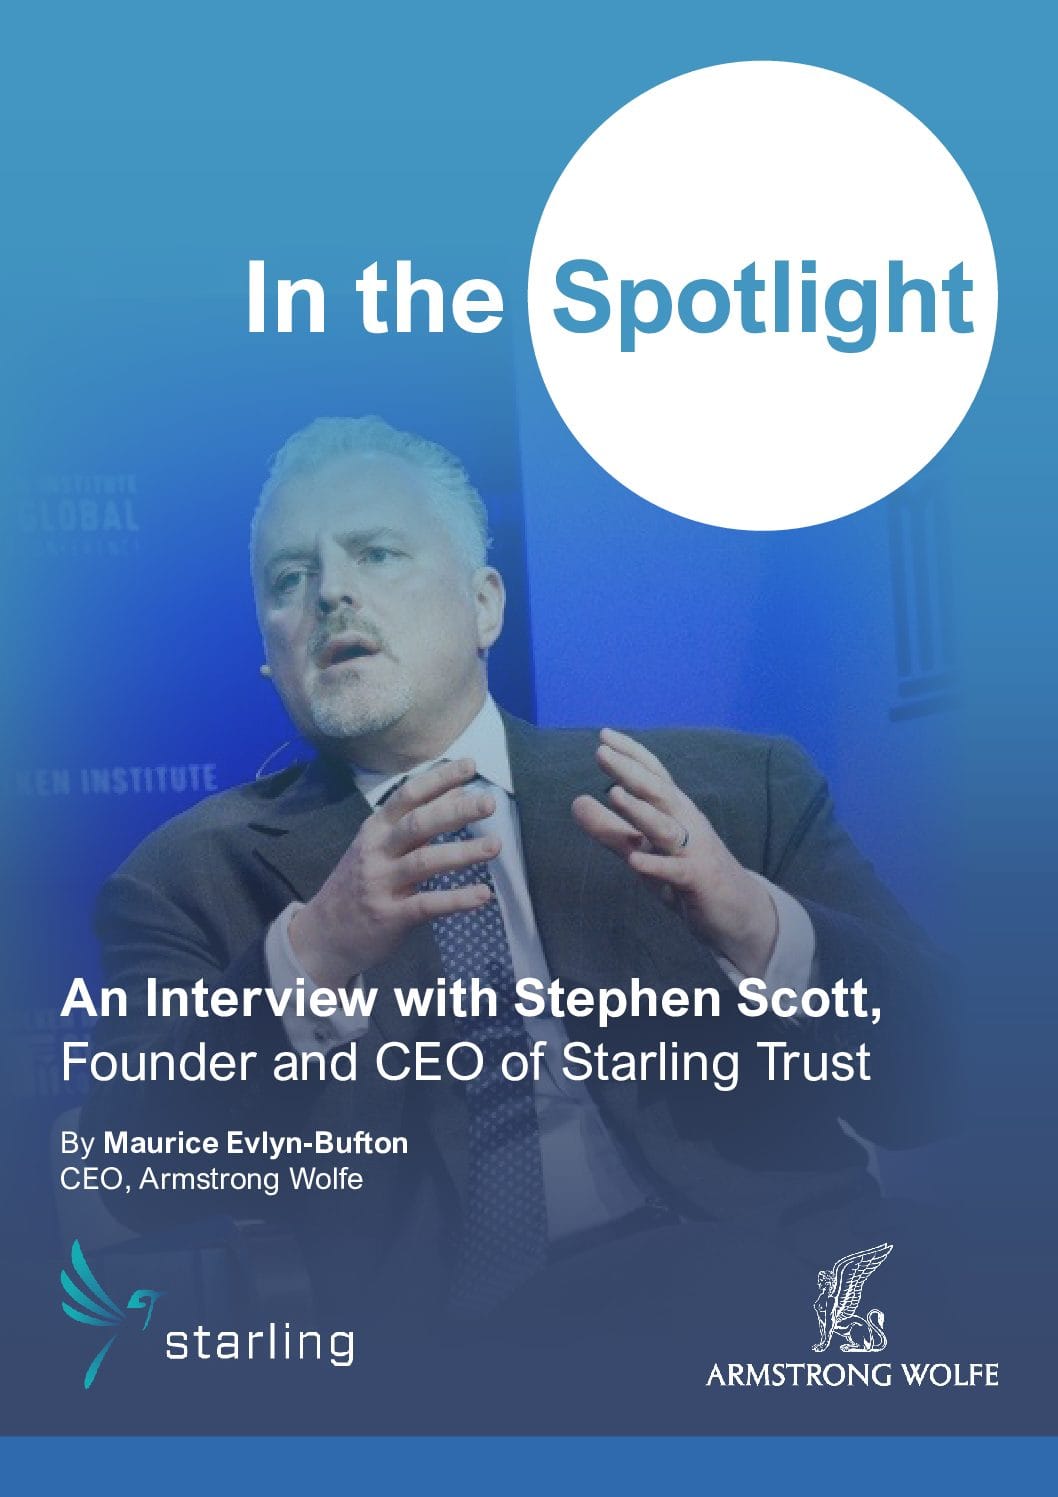 In the Spotlight: An Interview with Stephen Scott, Founder and CEO, Starling Trust